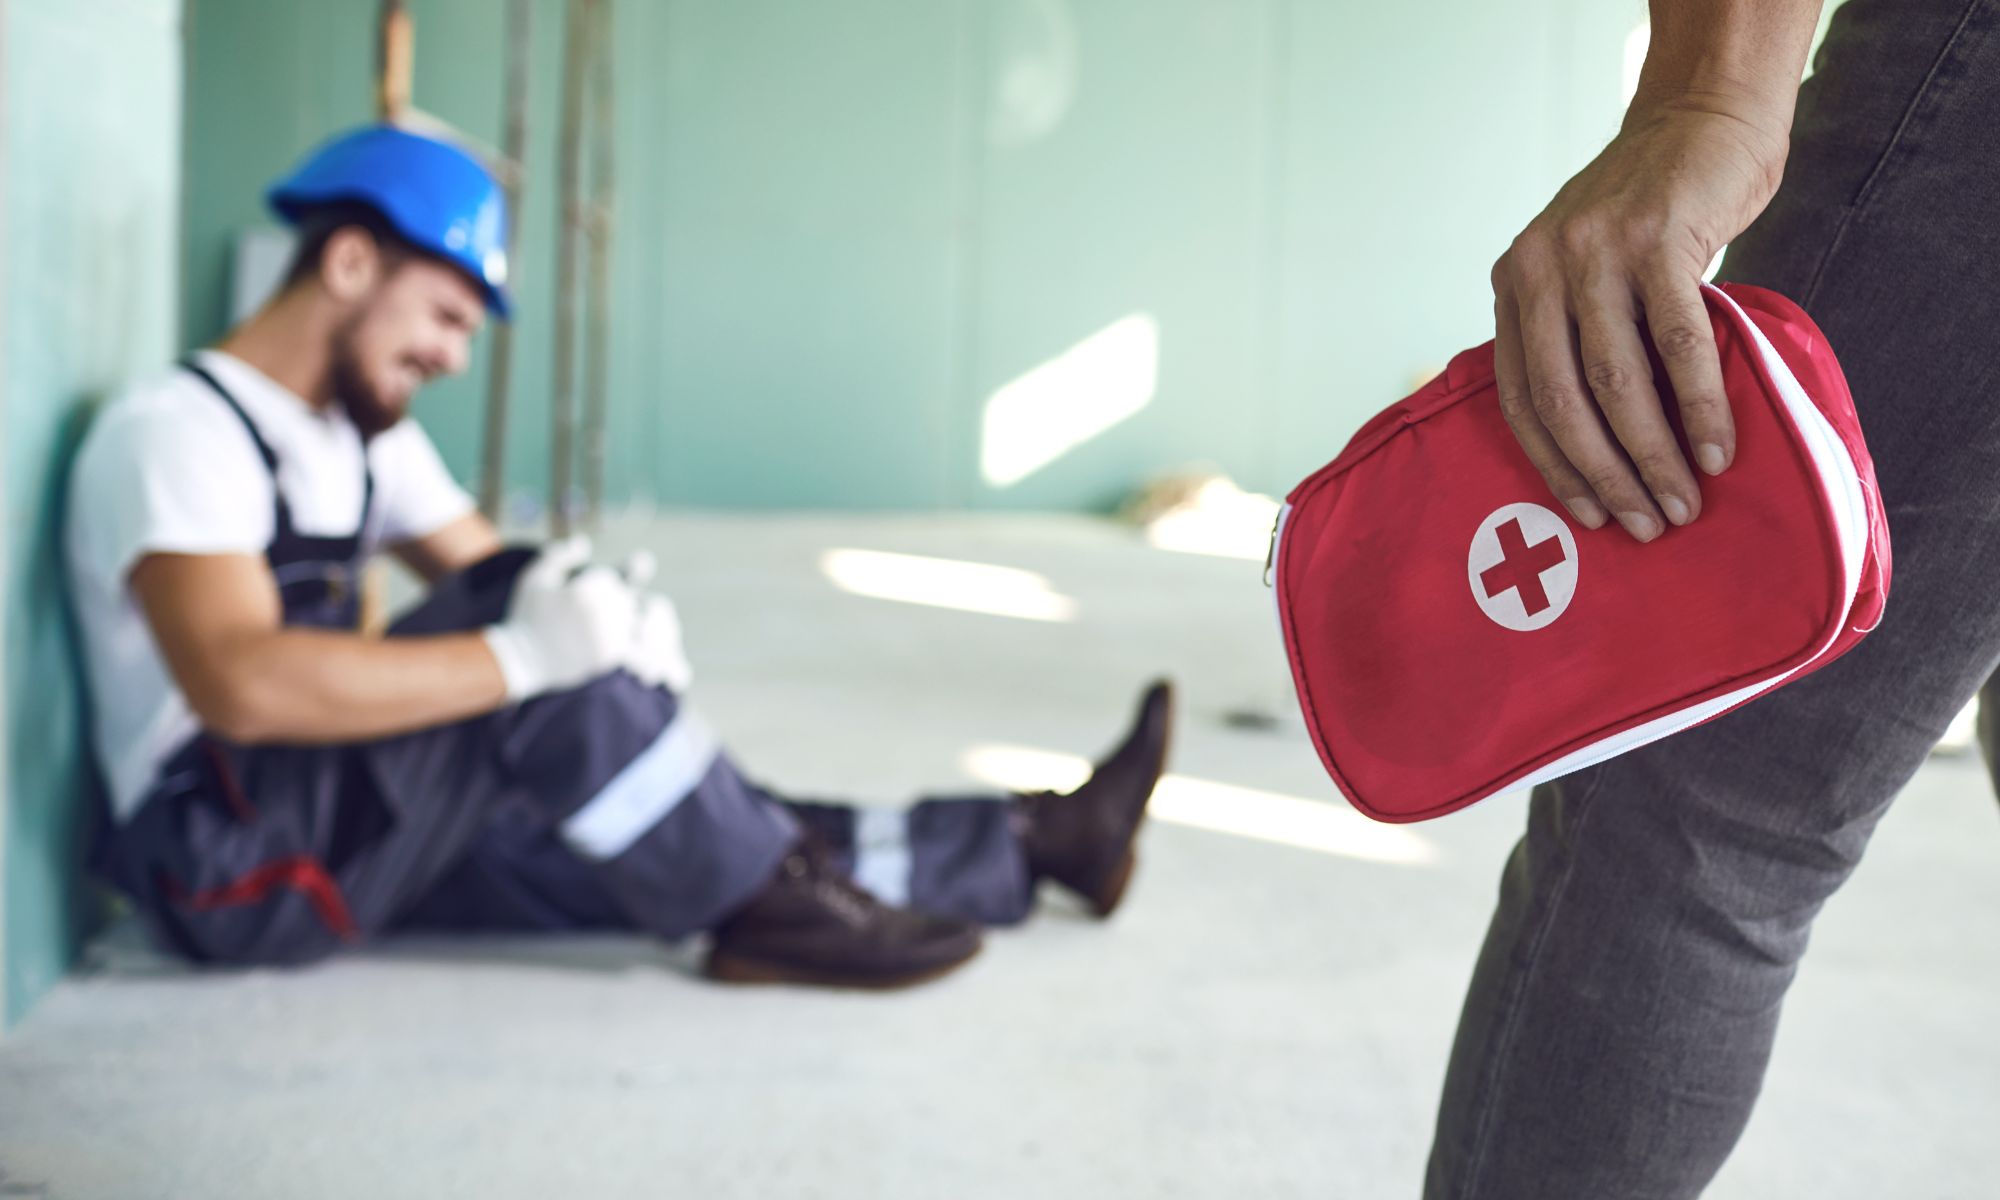 A first aid trained colleague goes to aid an injured worker